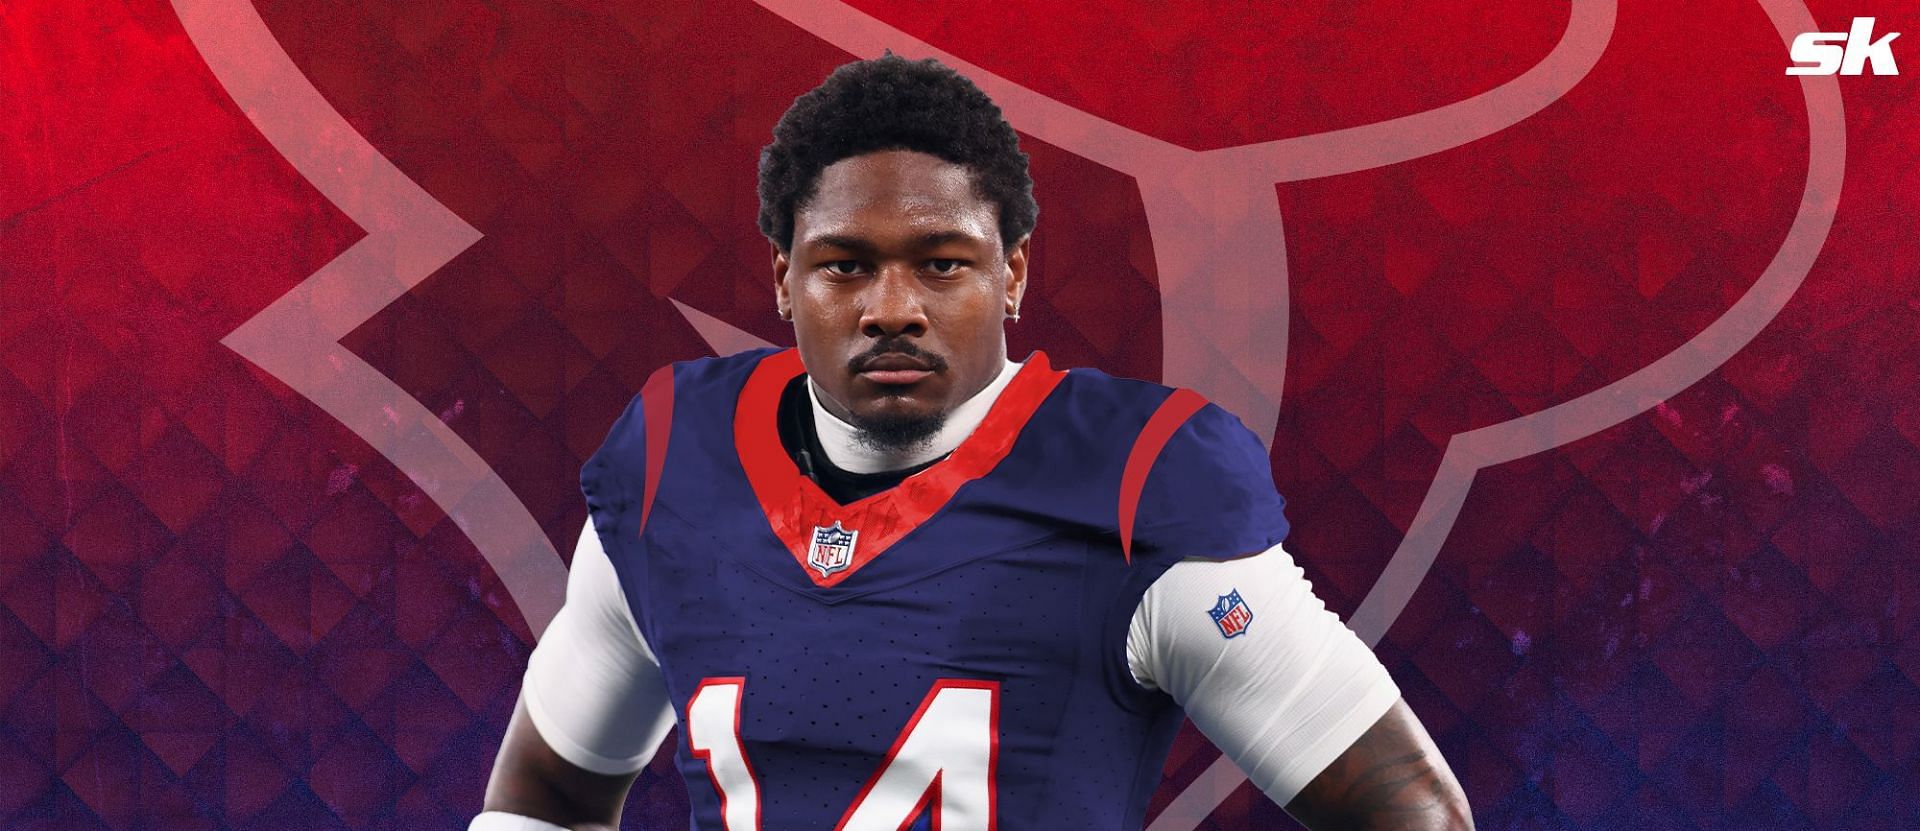 NFL fans flag AI use in Stefon Diggs&rsquo; heartfelt message to Bills Mafia following shock Texans trade